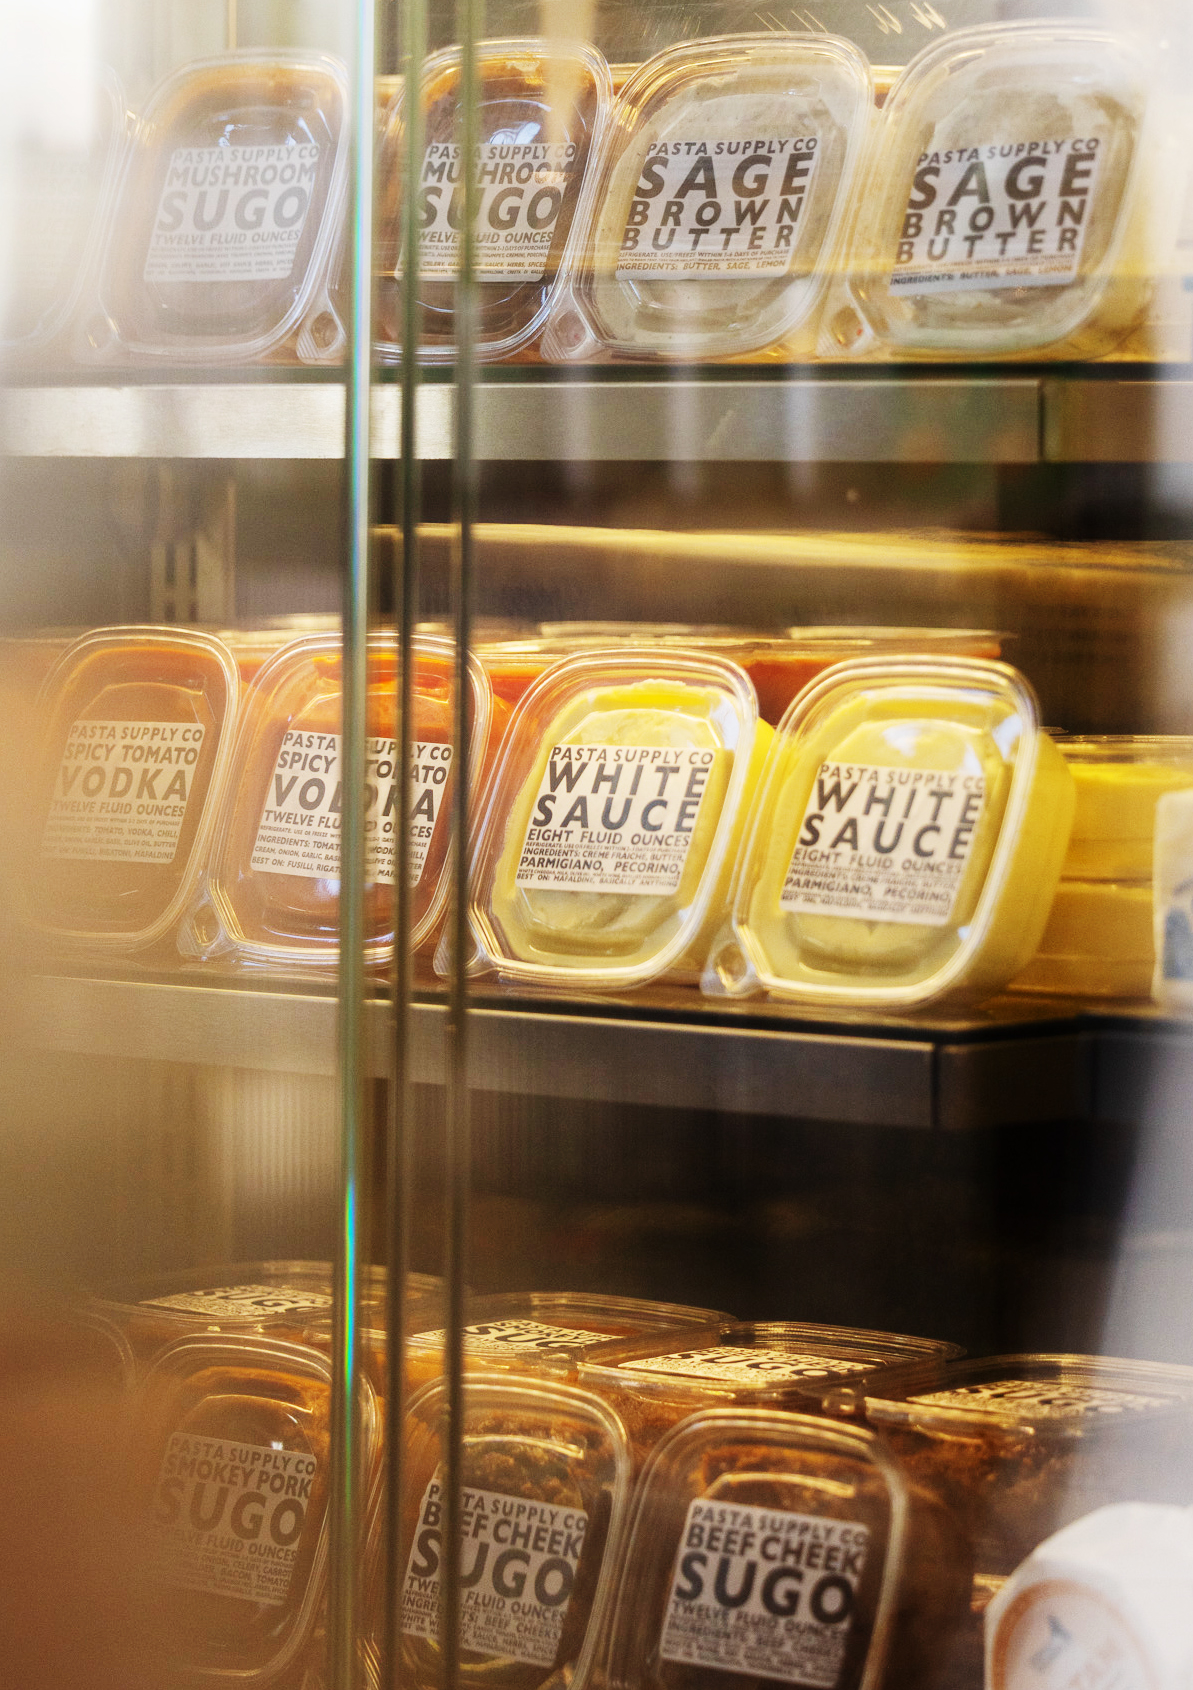 The image shows a display fridge stocked with various pasta sauces in clear plastic containers labeled with flavors like mushroom, sage brown butter, tomato vodka, and white sauce.